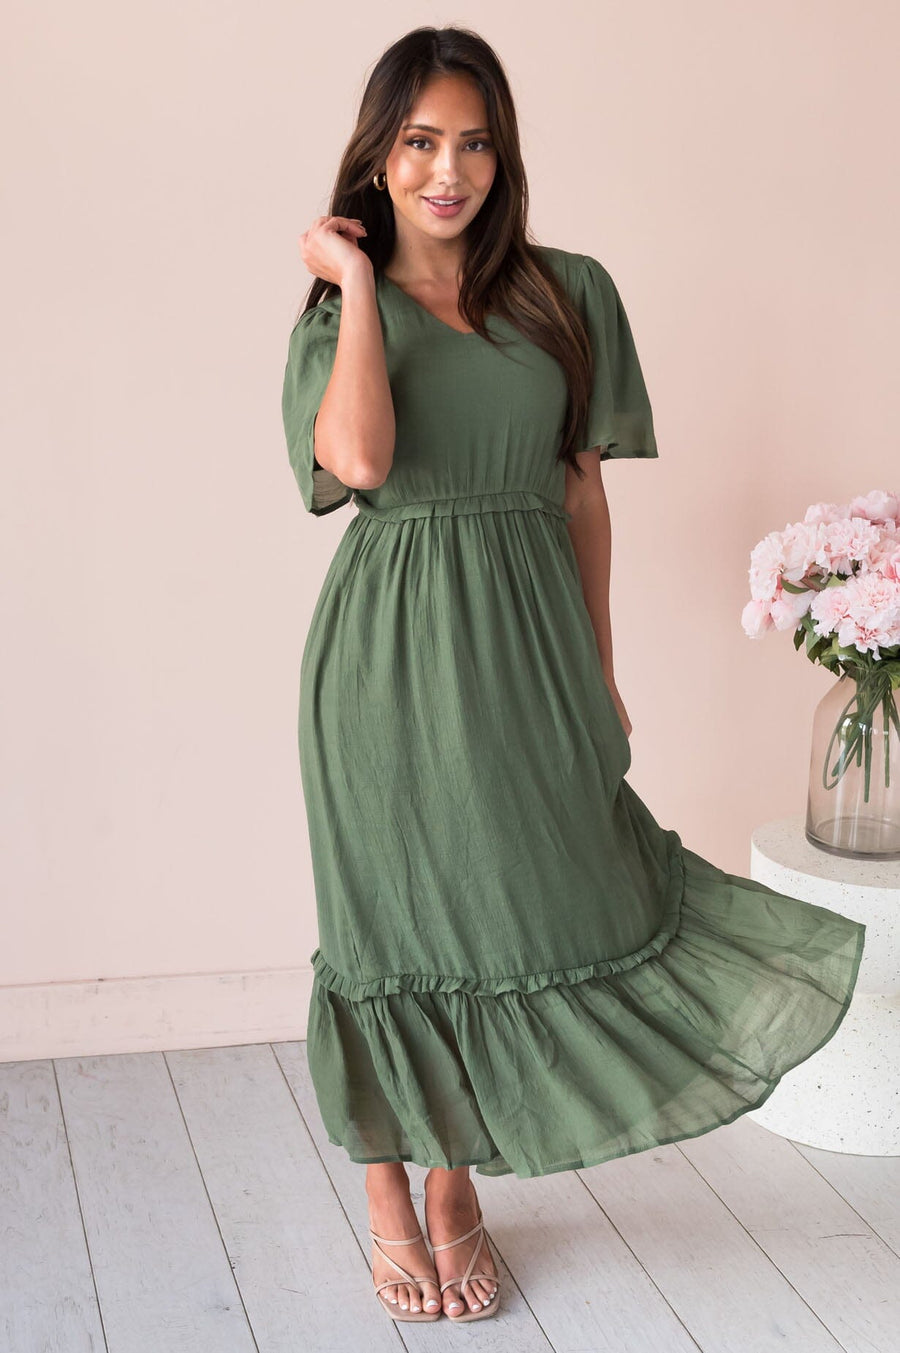 Modest Dresses for Women Page 15 - NeeSee's Dresses